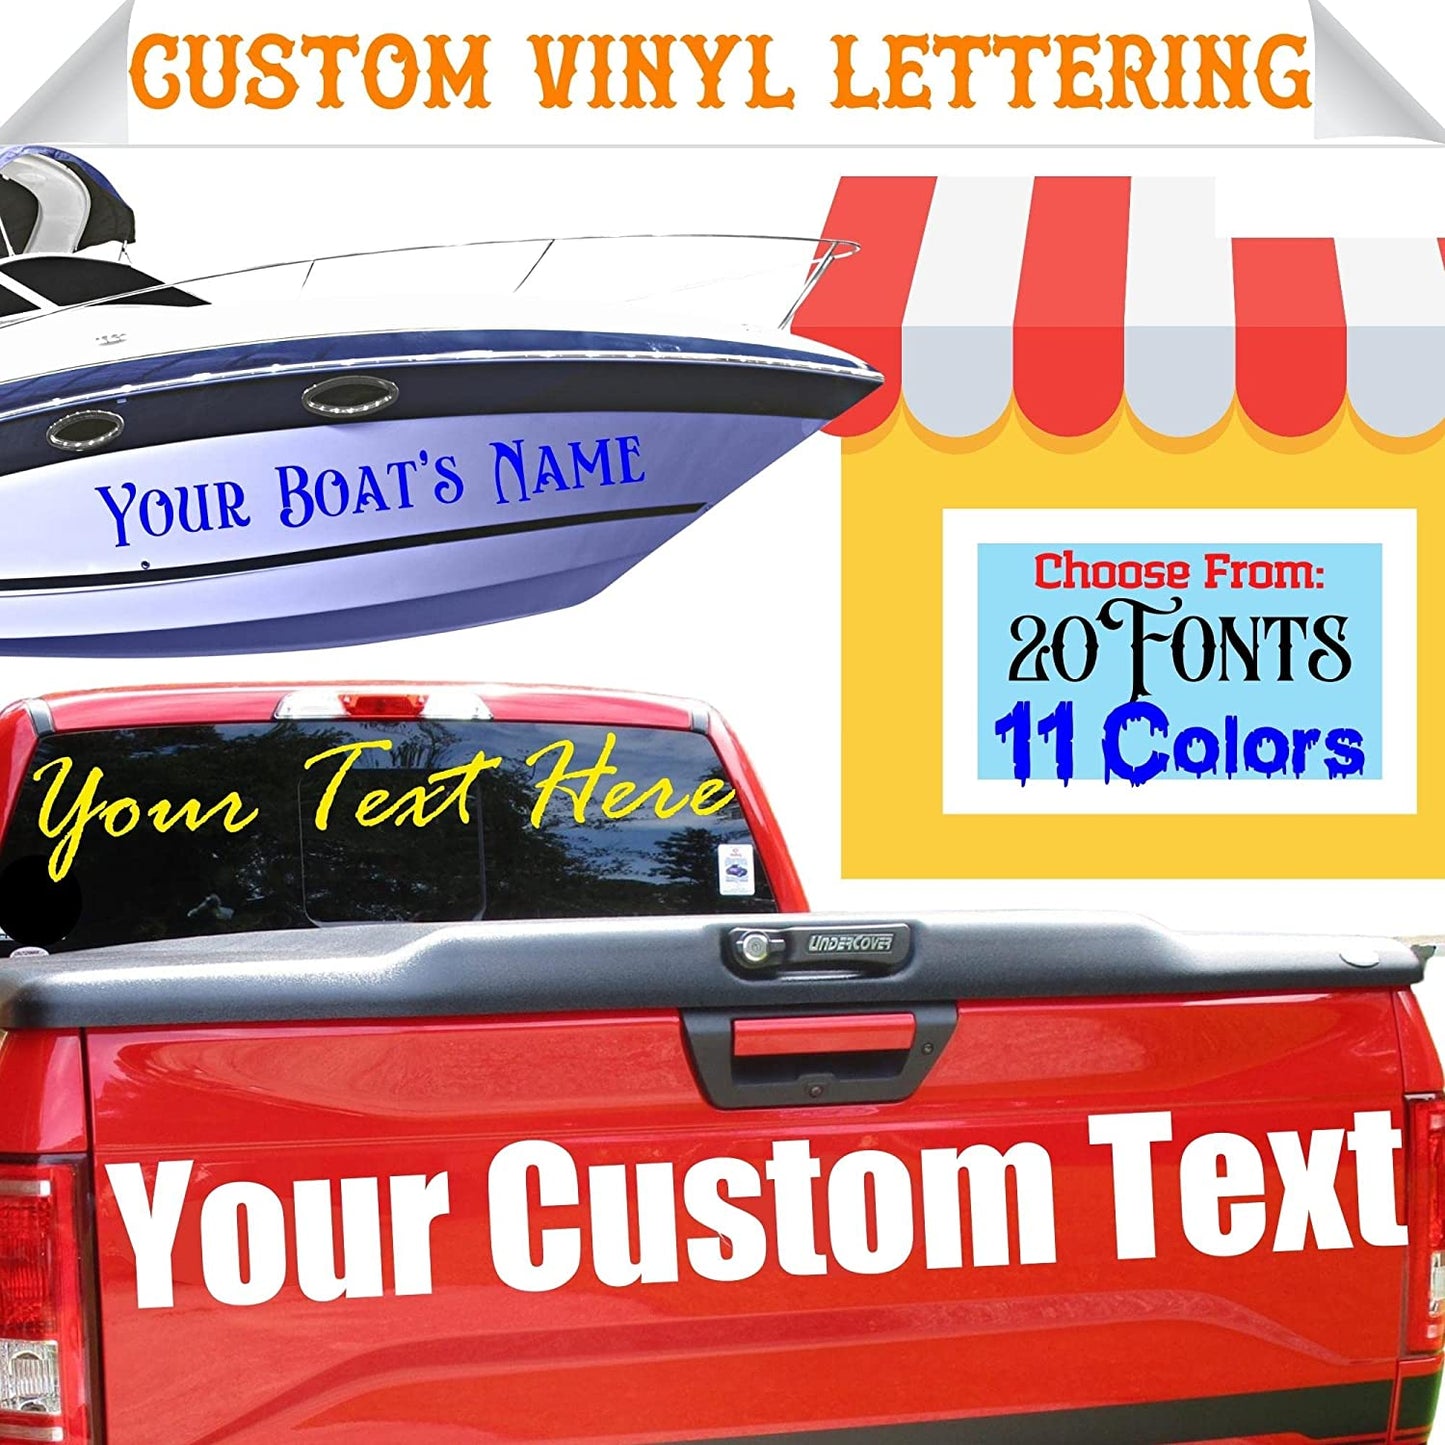 Custom Vinyl Lettering Decal | Make Your Own Car Sticker Decal Personalized Text - Waterproof and Easy to Apply on Semi, Truck, Car, Boat, Window, Windshield, Door, Business or Bumper | 30 Fonts & 11 Colors (7 inch High Lettering)